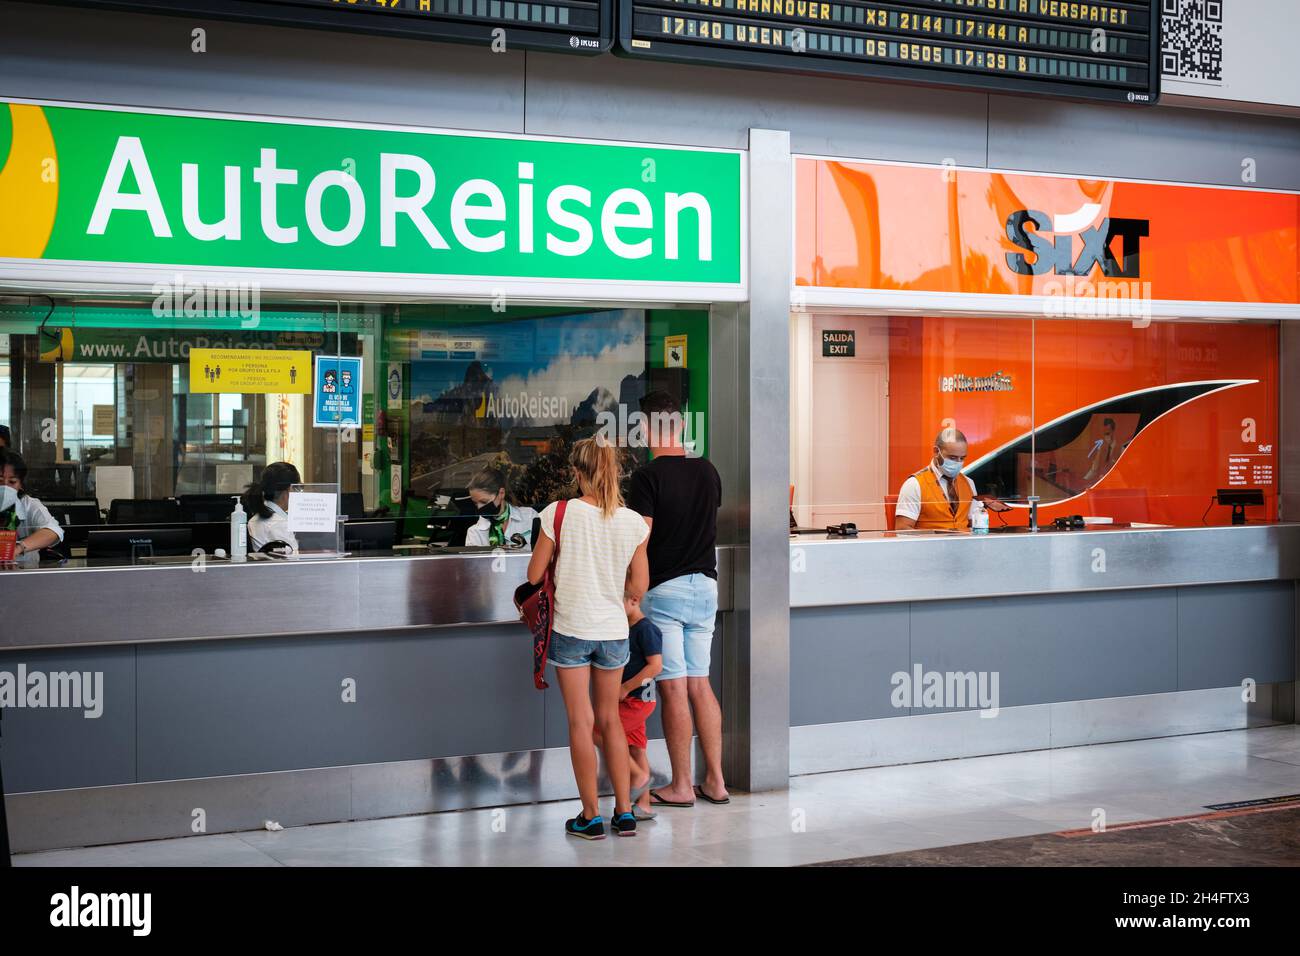 Tenerife, Spain - September, 2021: People at car rental counter (Autoreisen) renting a car for vacation at airport Stock Photo